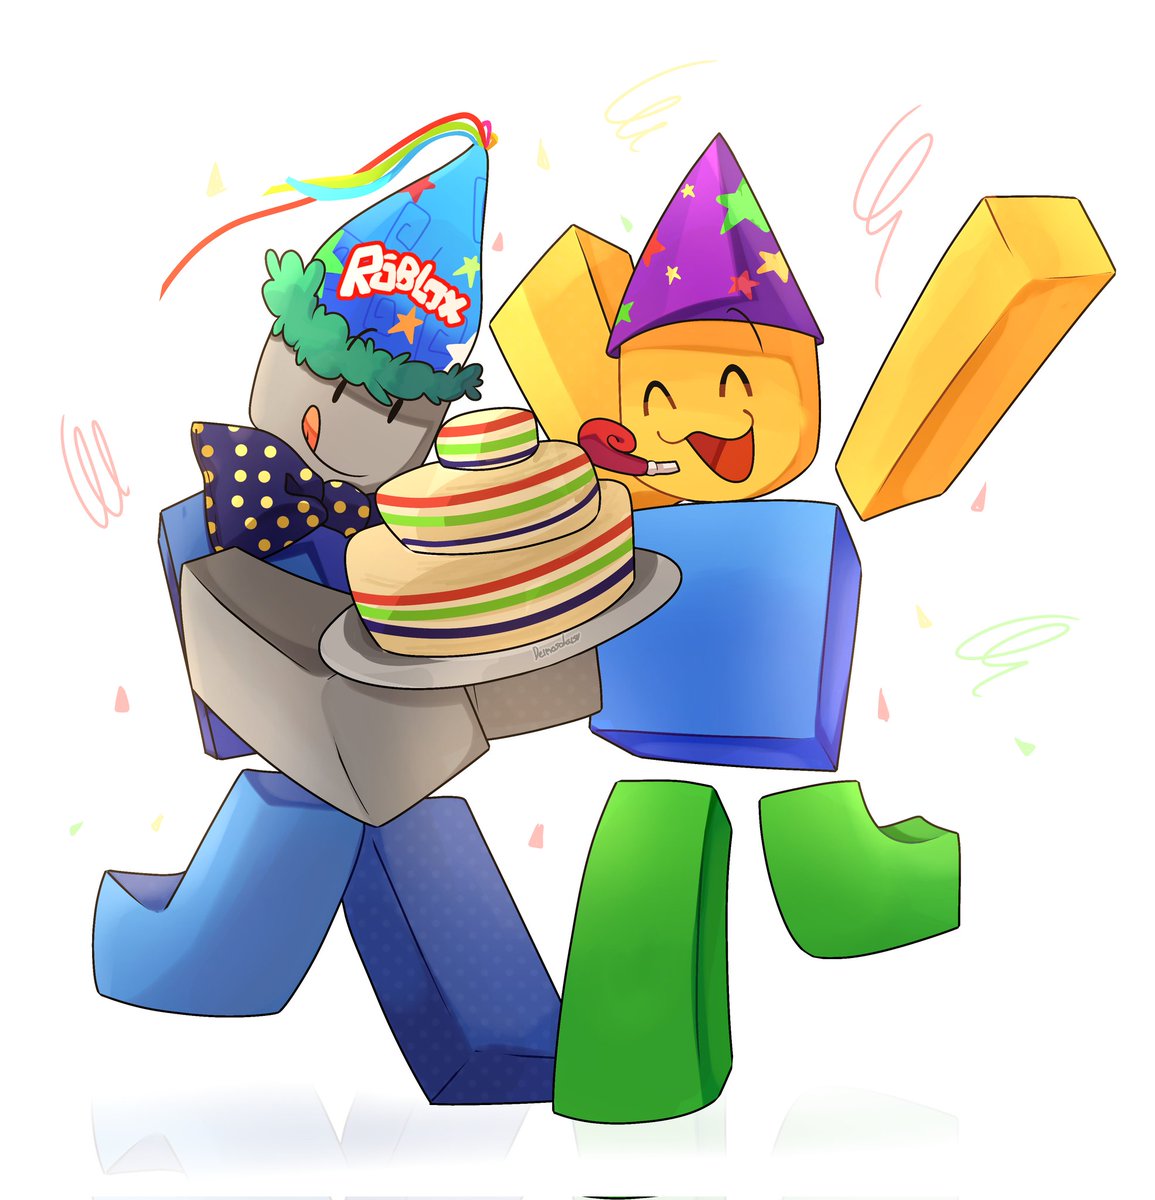 Party person from #GASA4 #SNACKCORE and Party Noob from #Regretevator
Party fellas 🎉!